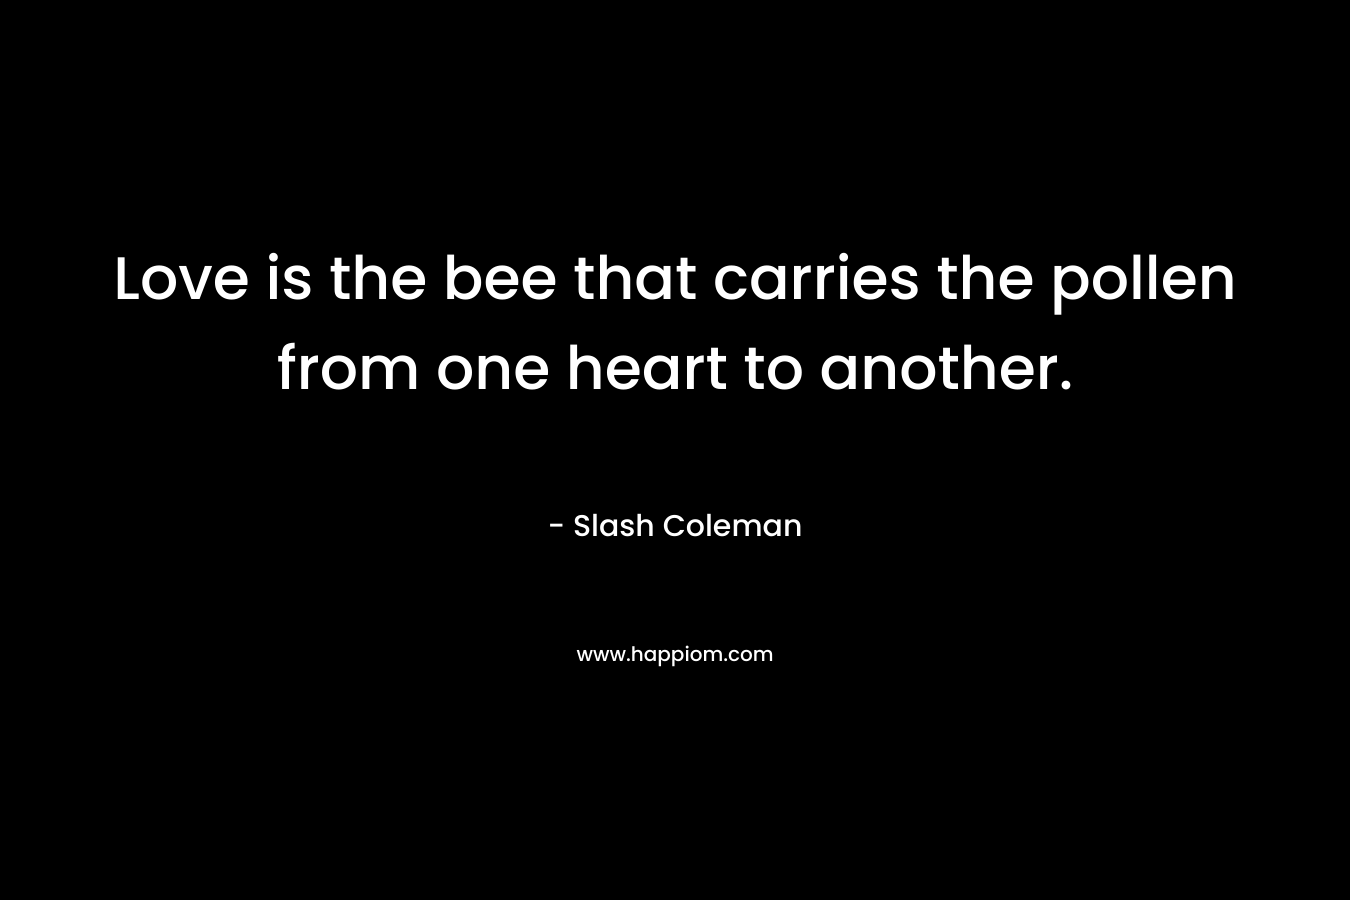 Love is the bee that carries the pollen from one heart to another. – Slash Coleman